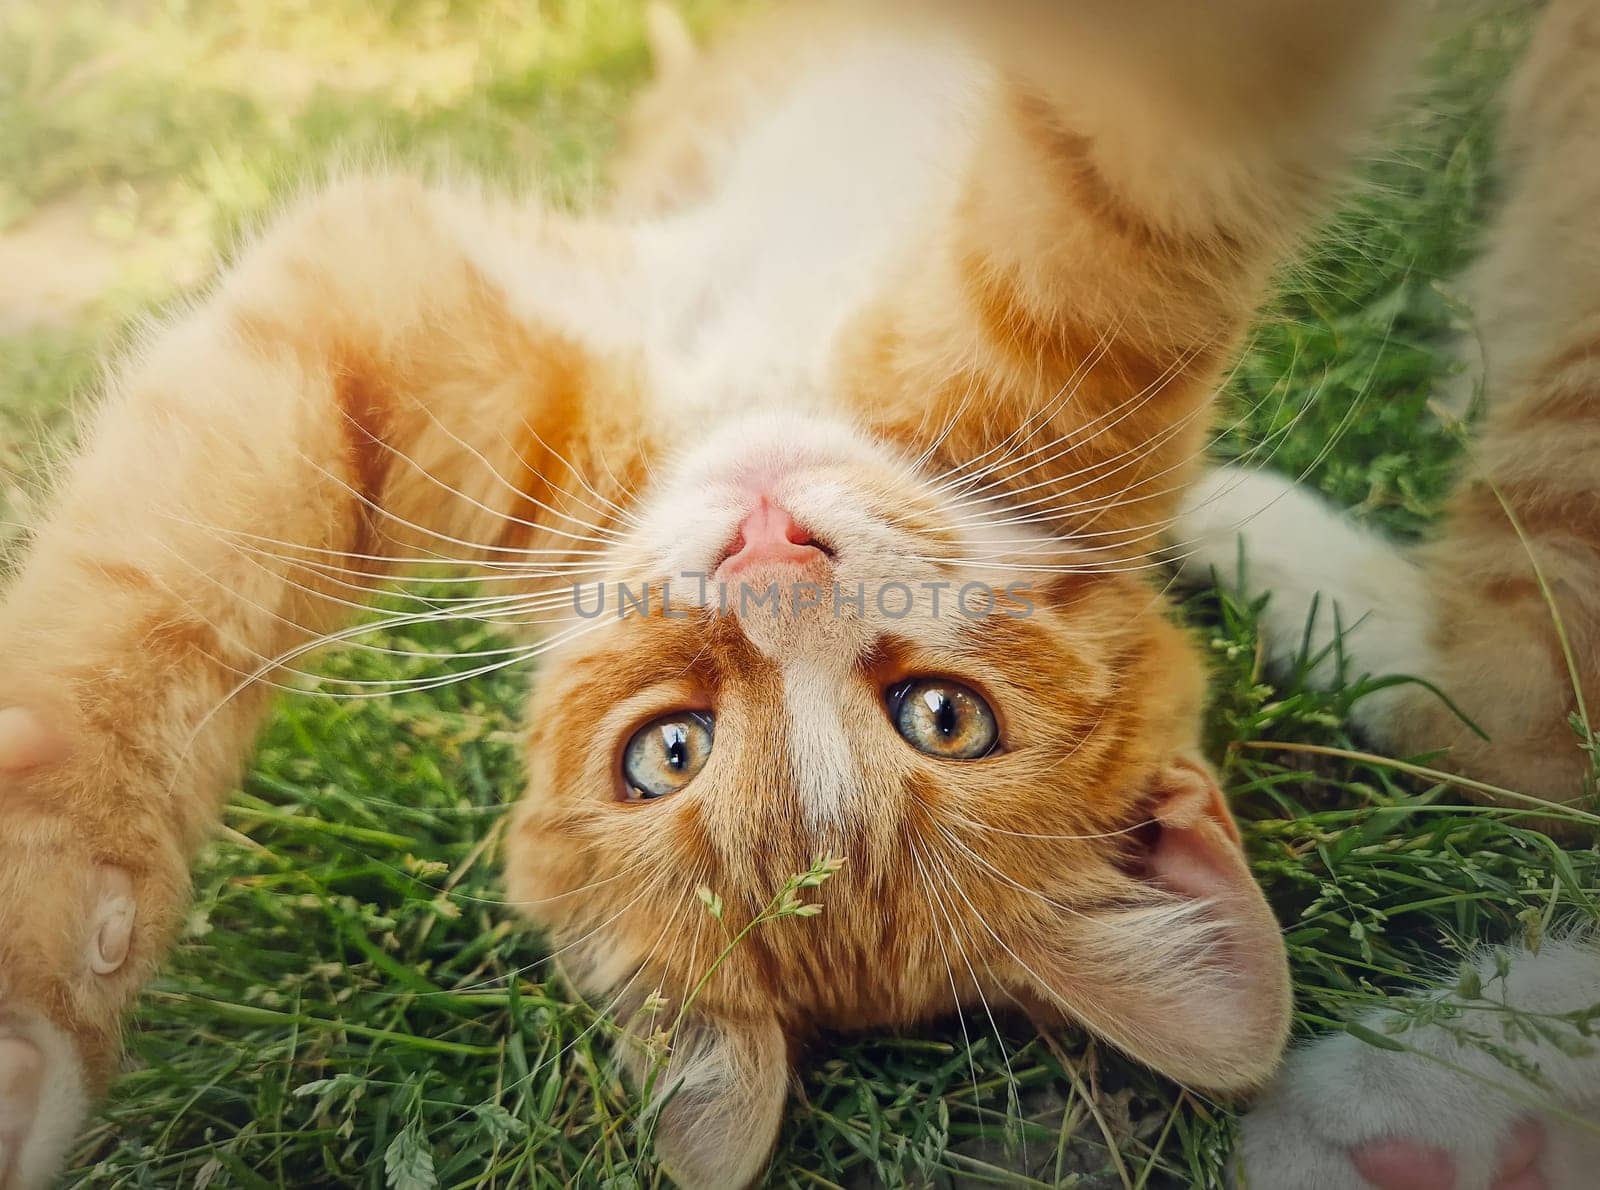 Playful orange kitten lying upside down on the green grass. Little ginger cat cute scene outdoors in the nature by psychoshadow